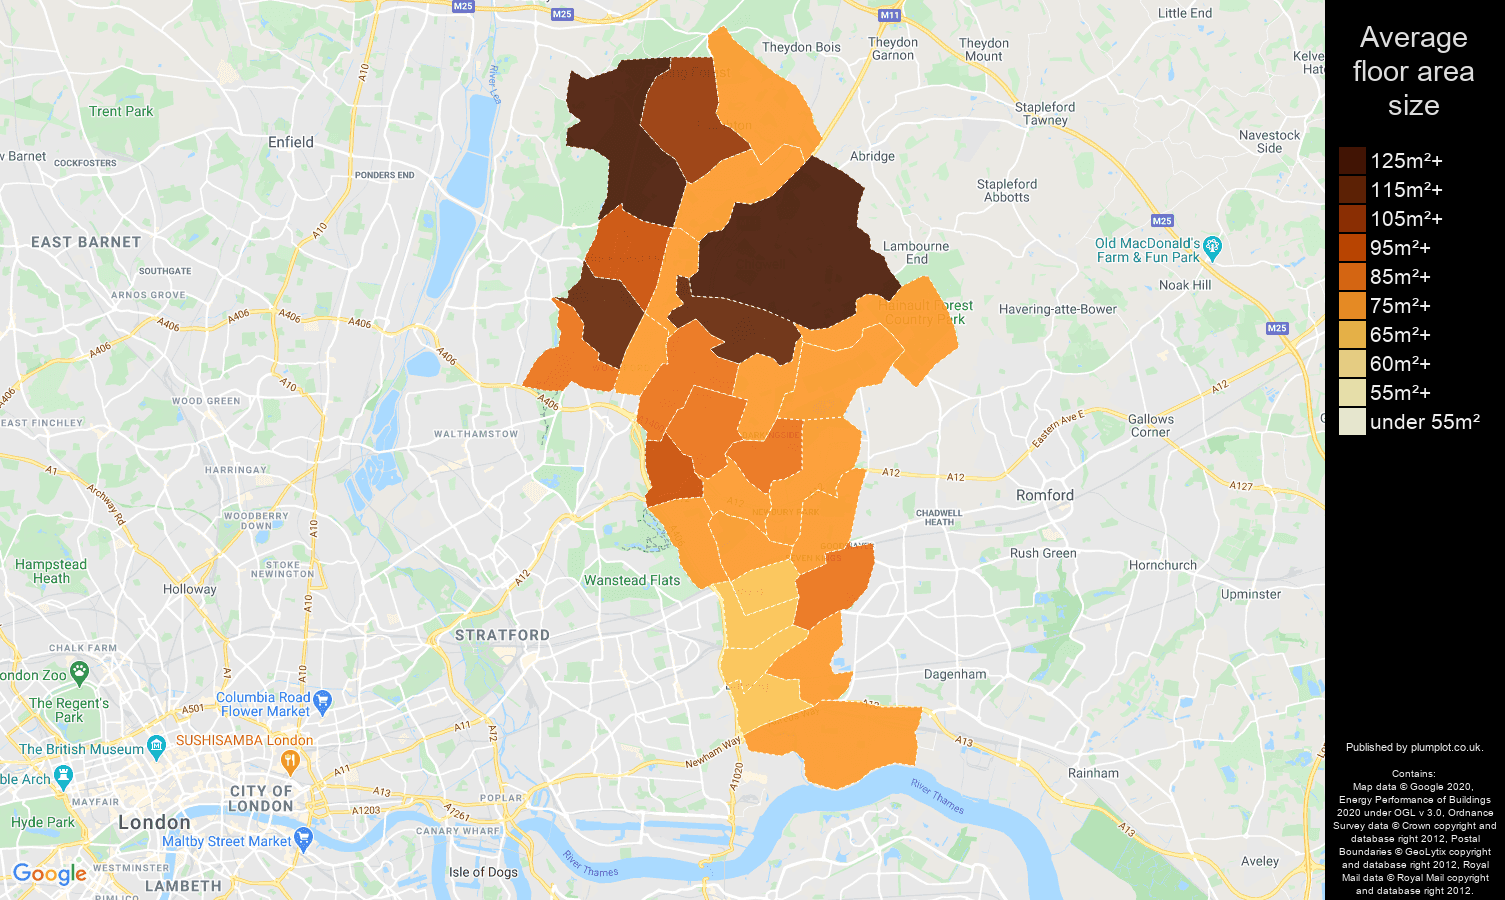 Ilford map of average floor area size of properties